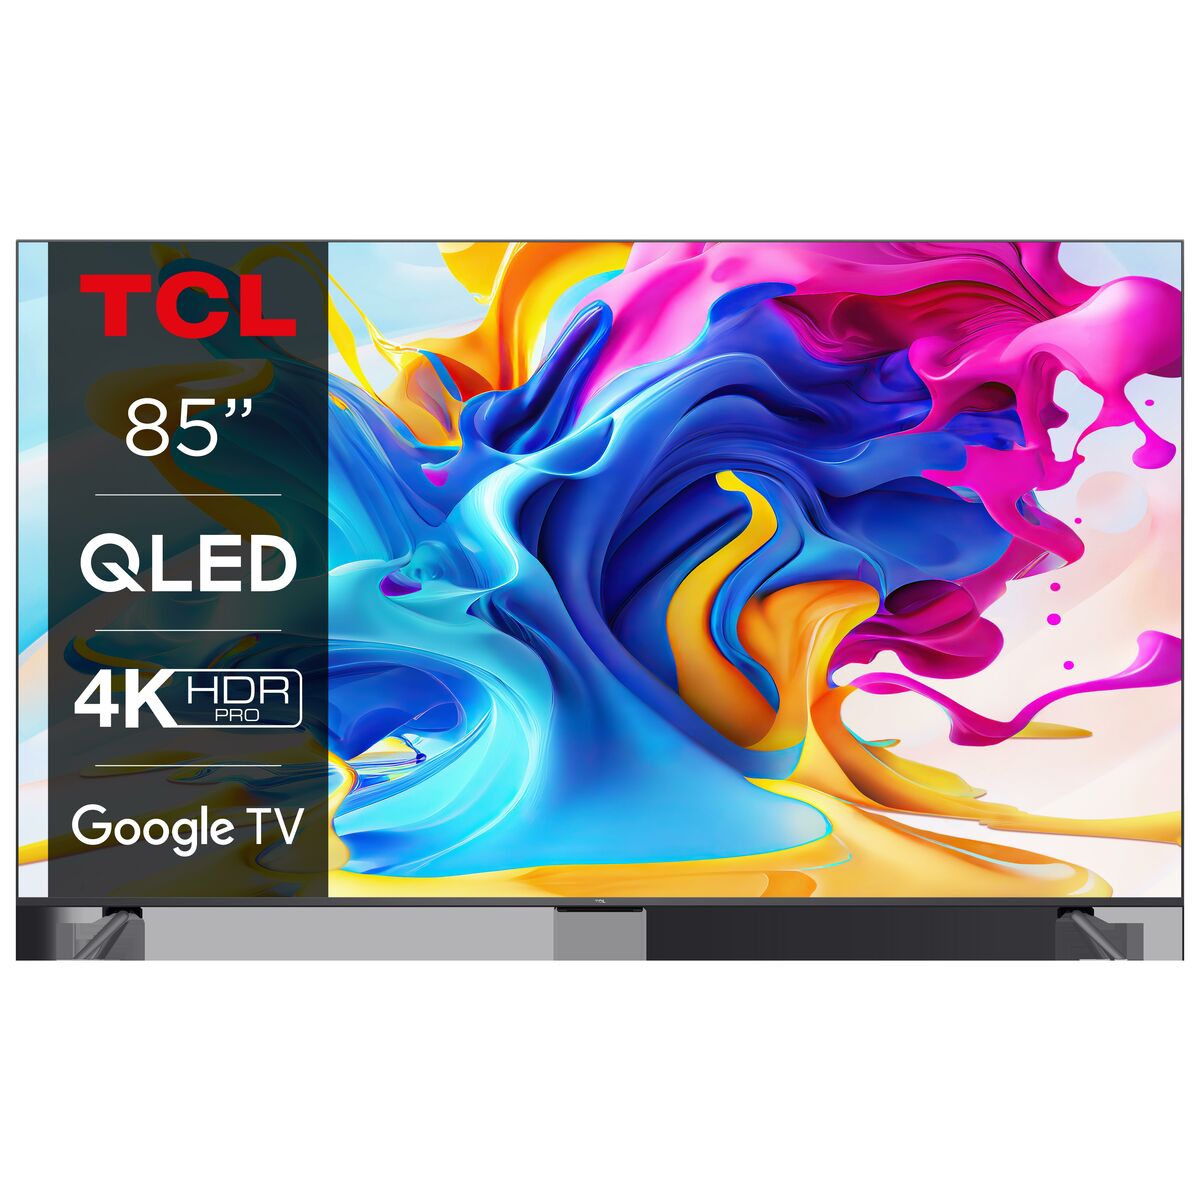 Television TCL 85C649 4K Ultra HD QLED 85" Direct-LED AMD FreeSync, TCL, Electronics, TV, Video and home cinema, television-tcl-85c649-4k-ultra-hd-qled-85-direct-led-amd-freesync, :85 INCHES or 215.9 CM, :AMD Freesync, :QLED, :Ultra HD, Brand_TCL, category-reference-2609, category-reference-2625, category-reference-2931, category-reference-t-18805, category-reference-t-19653, cinema and television, Condition_NEW, entertainment, Price_+ 1000, RiotNook